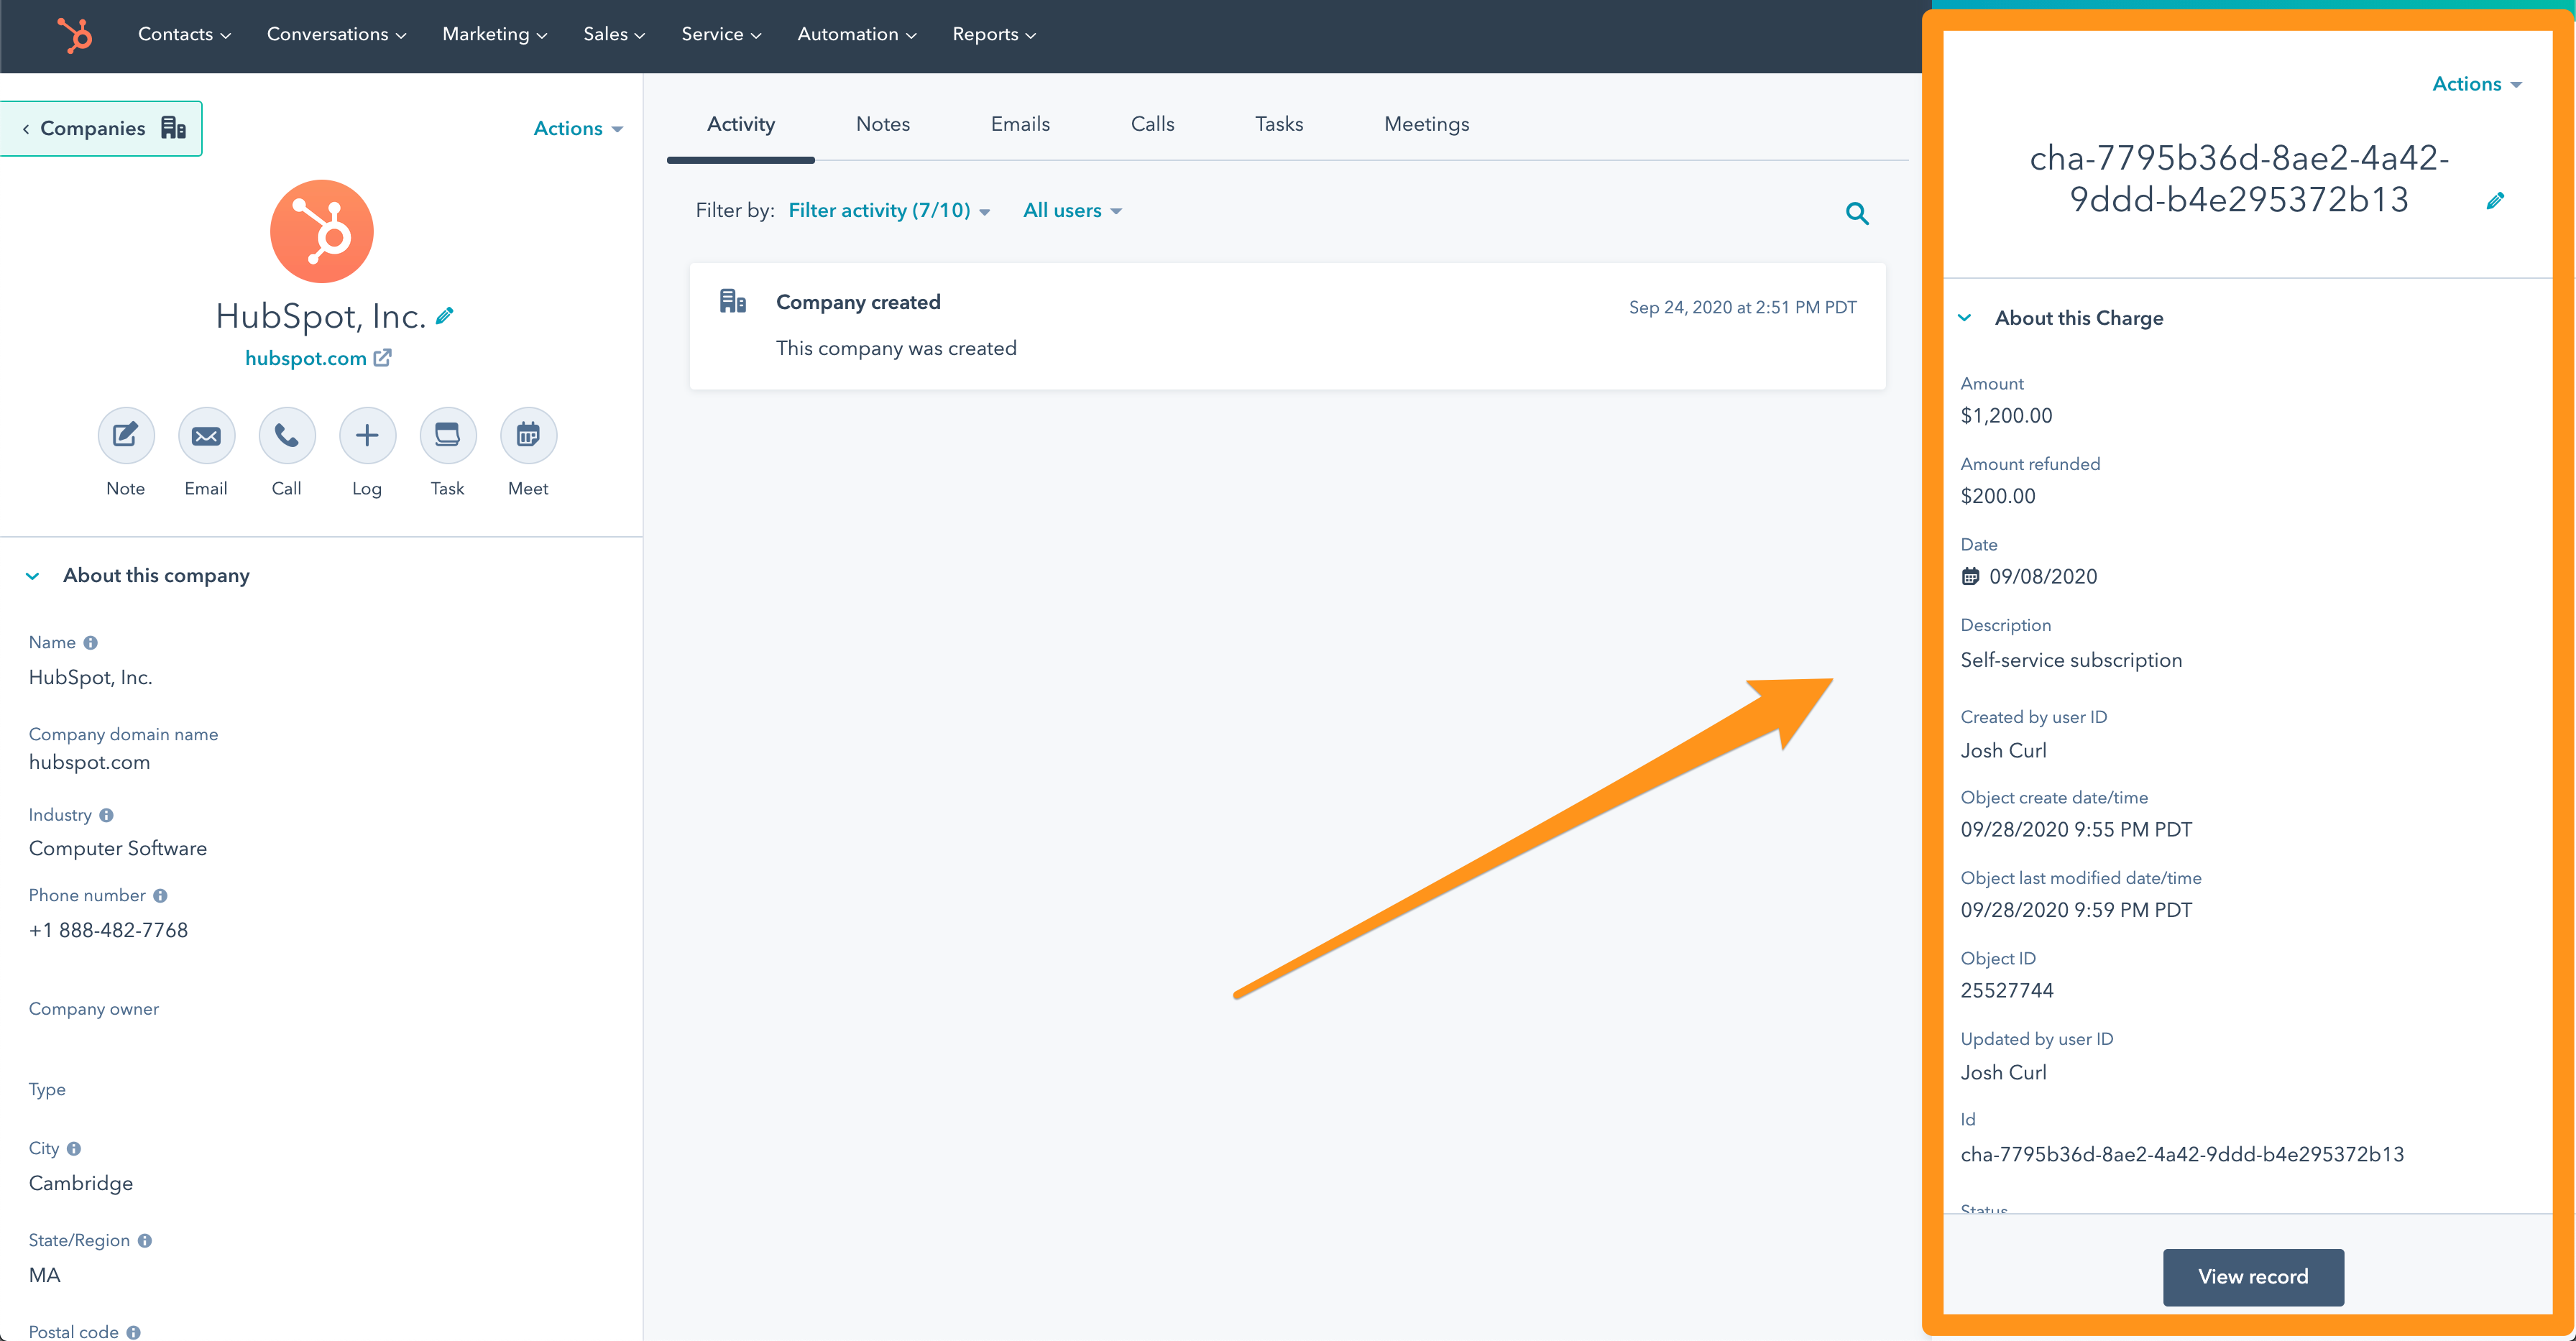 how-to-sync-custom-objects-and-fields-from-your-data-warehouse-to-hubspot 3.png